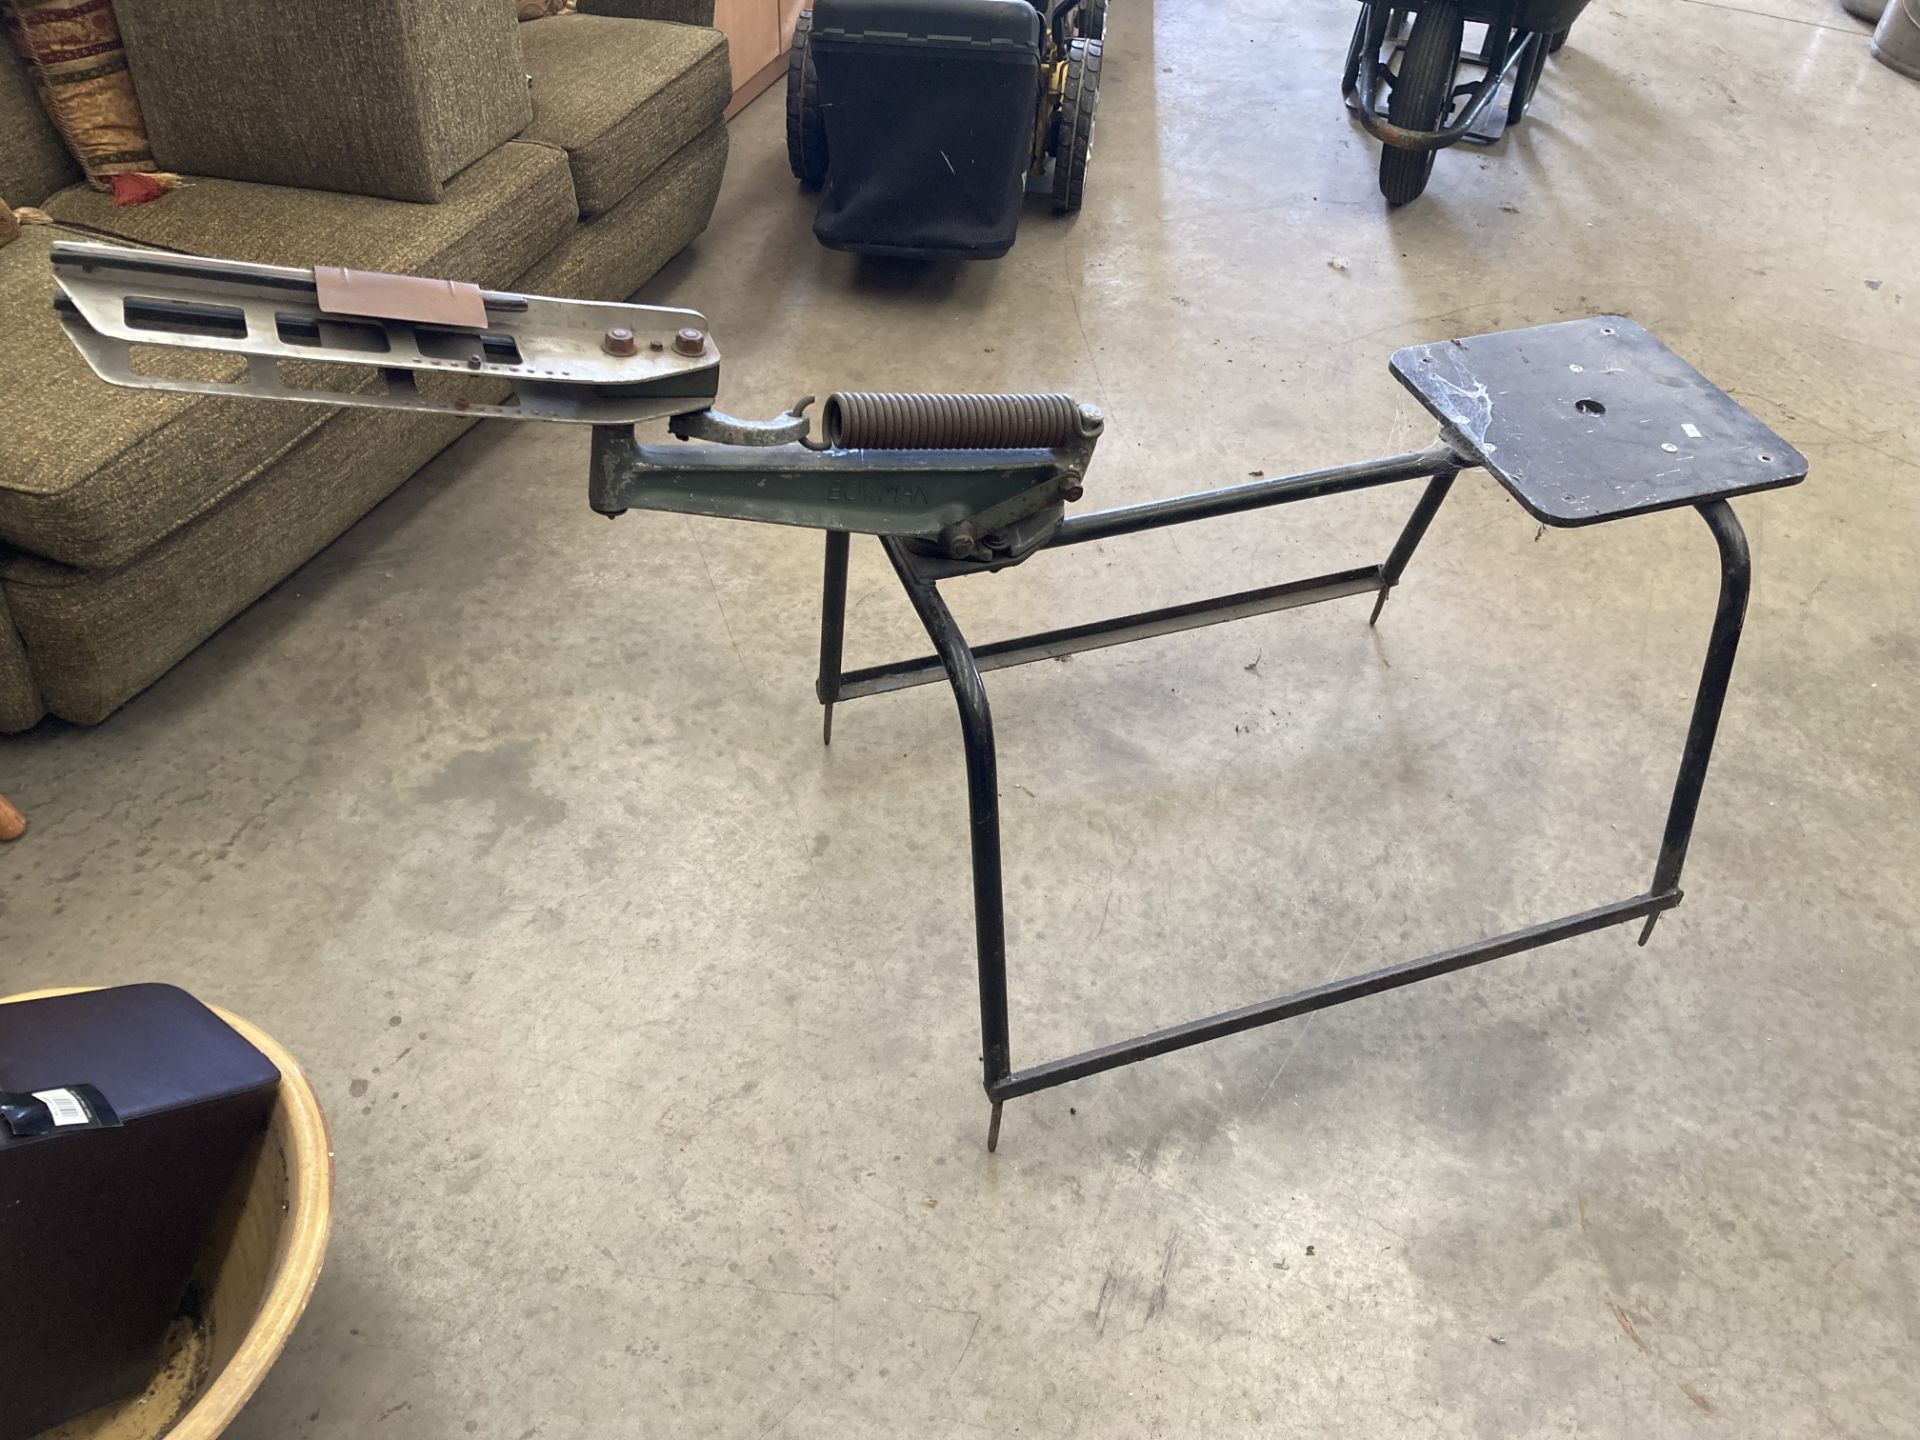 BOWMAN clay pigeon launcher on a black metal frame